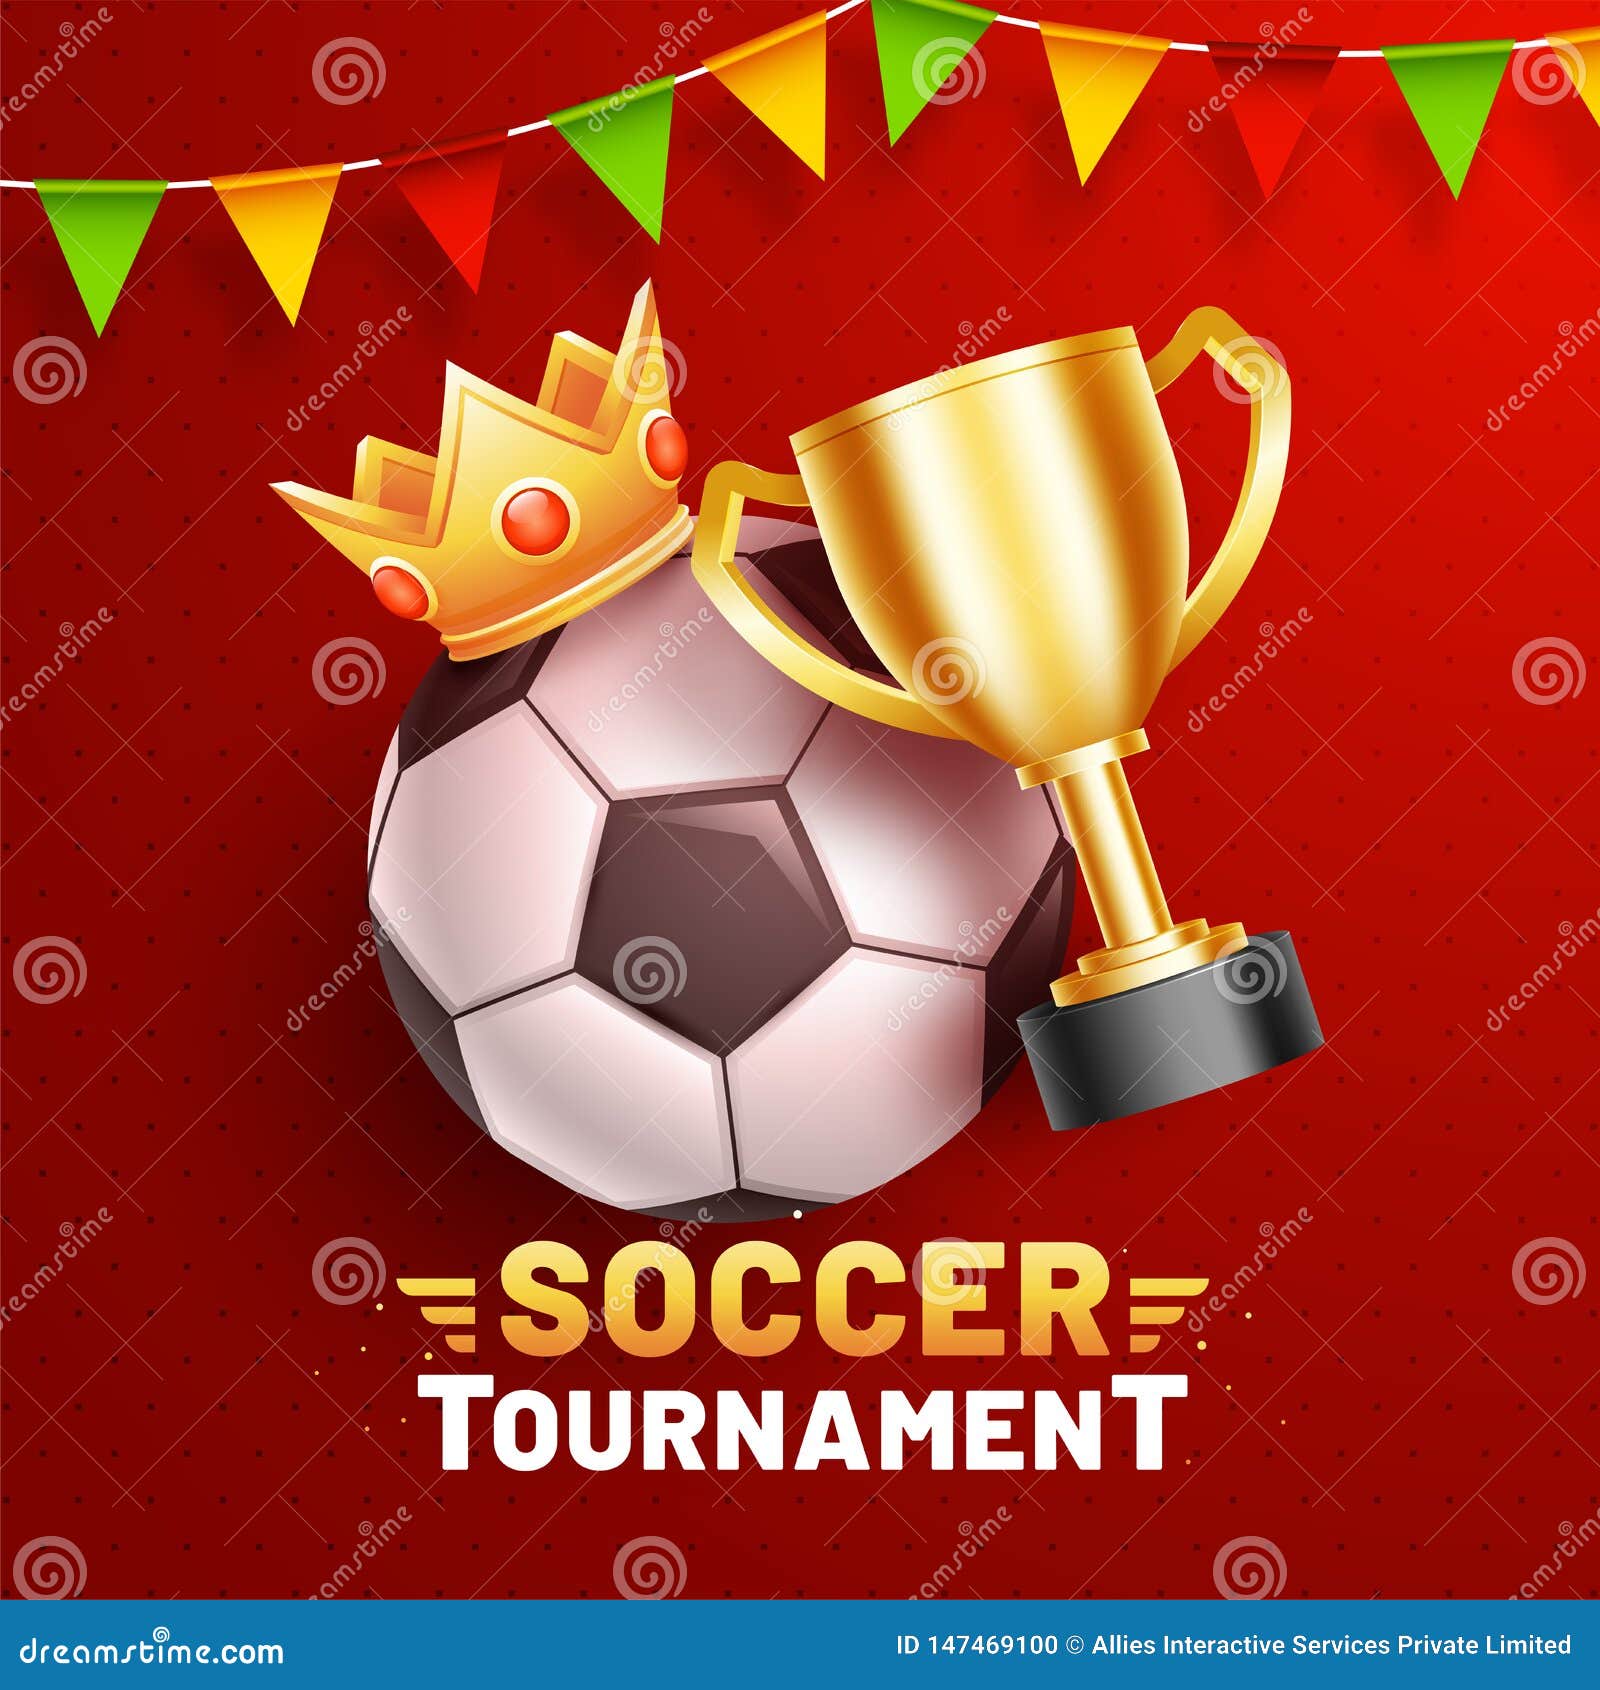 Red Poster or Template Design with Illustration of Soccer Ball, Winner  Crown and Golden Champion Trophy for Soccer Tournament Stock Illustration -  Illustration of bunting, championship: 147469100